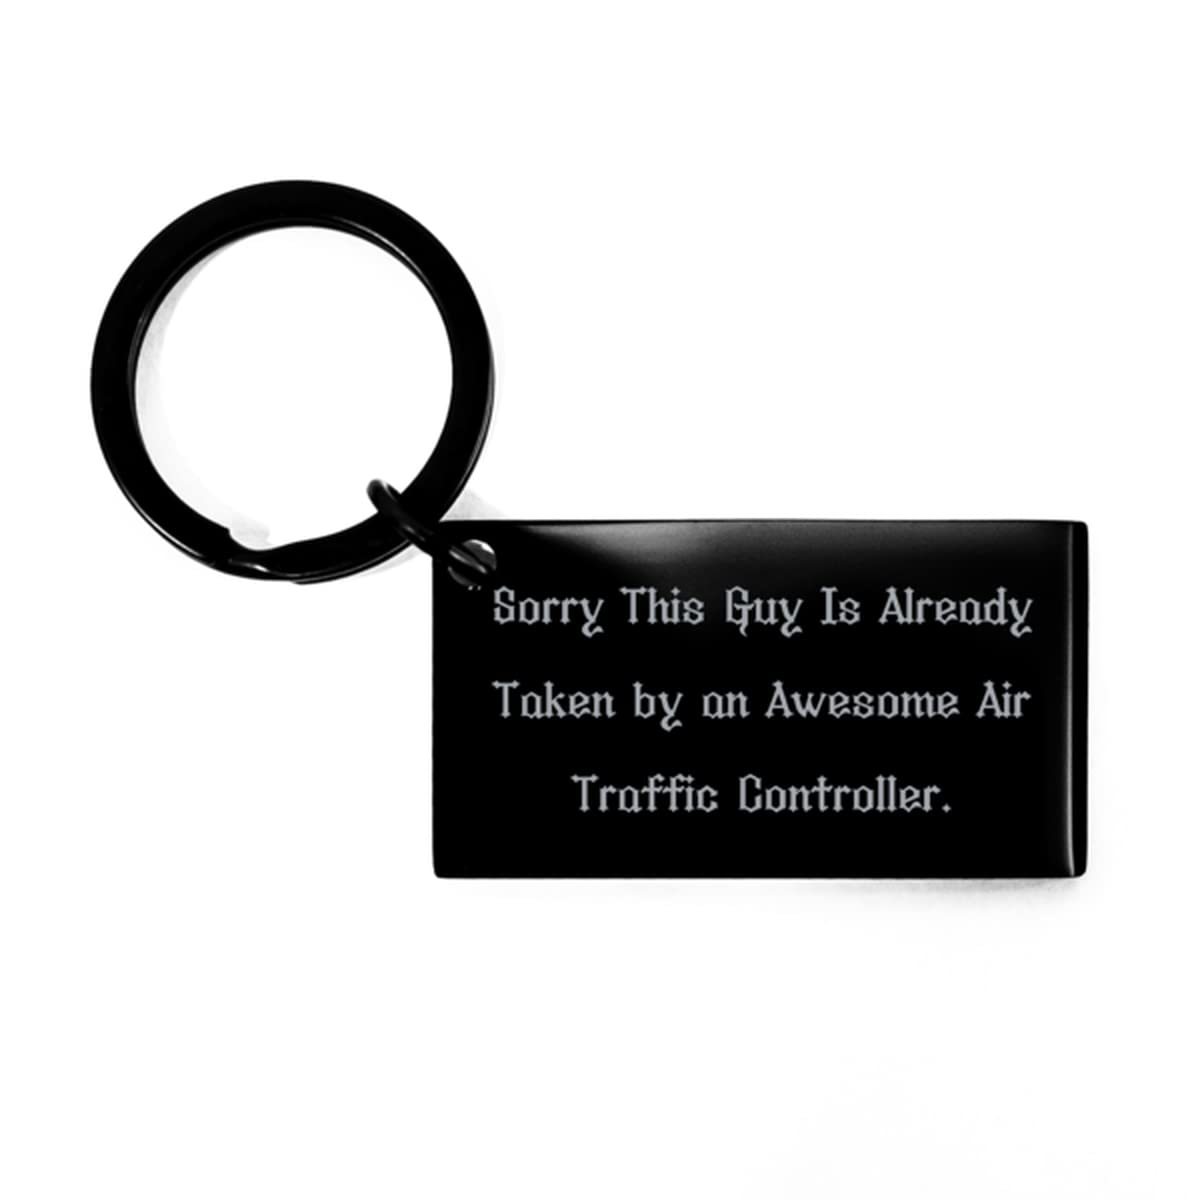 Primary image for Cheap Air Traffic Controller Keychain, Sorry This Guy is Already Taken by an Awe